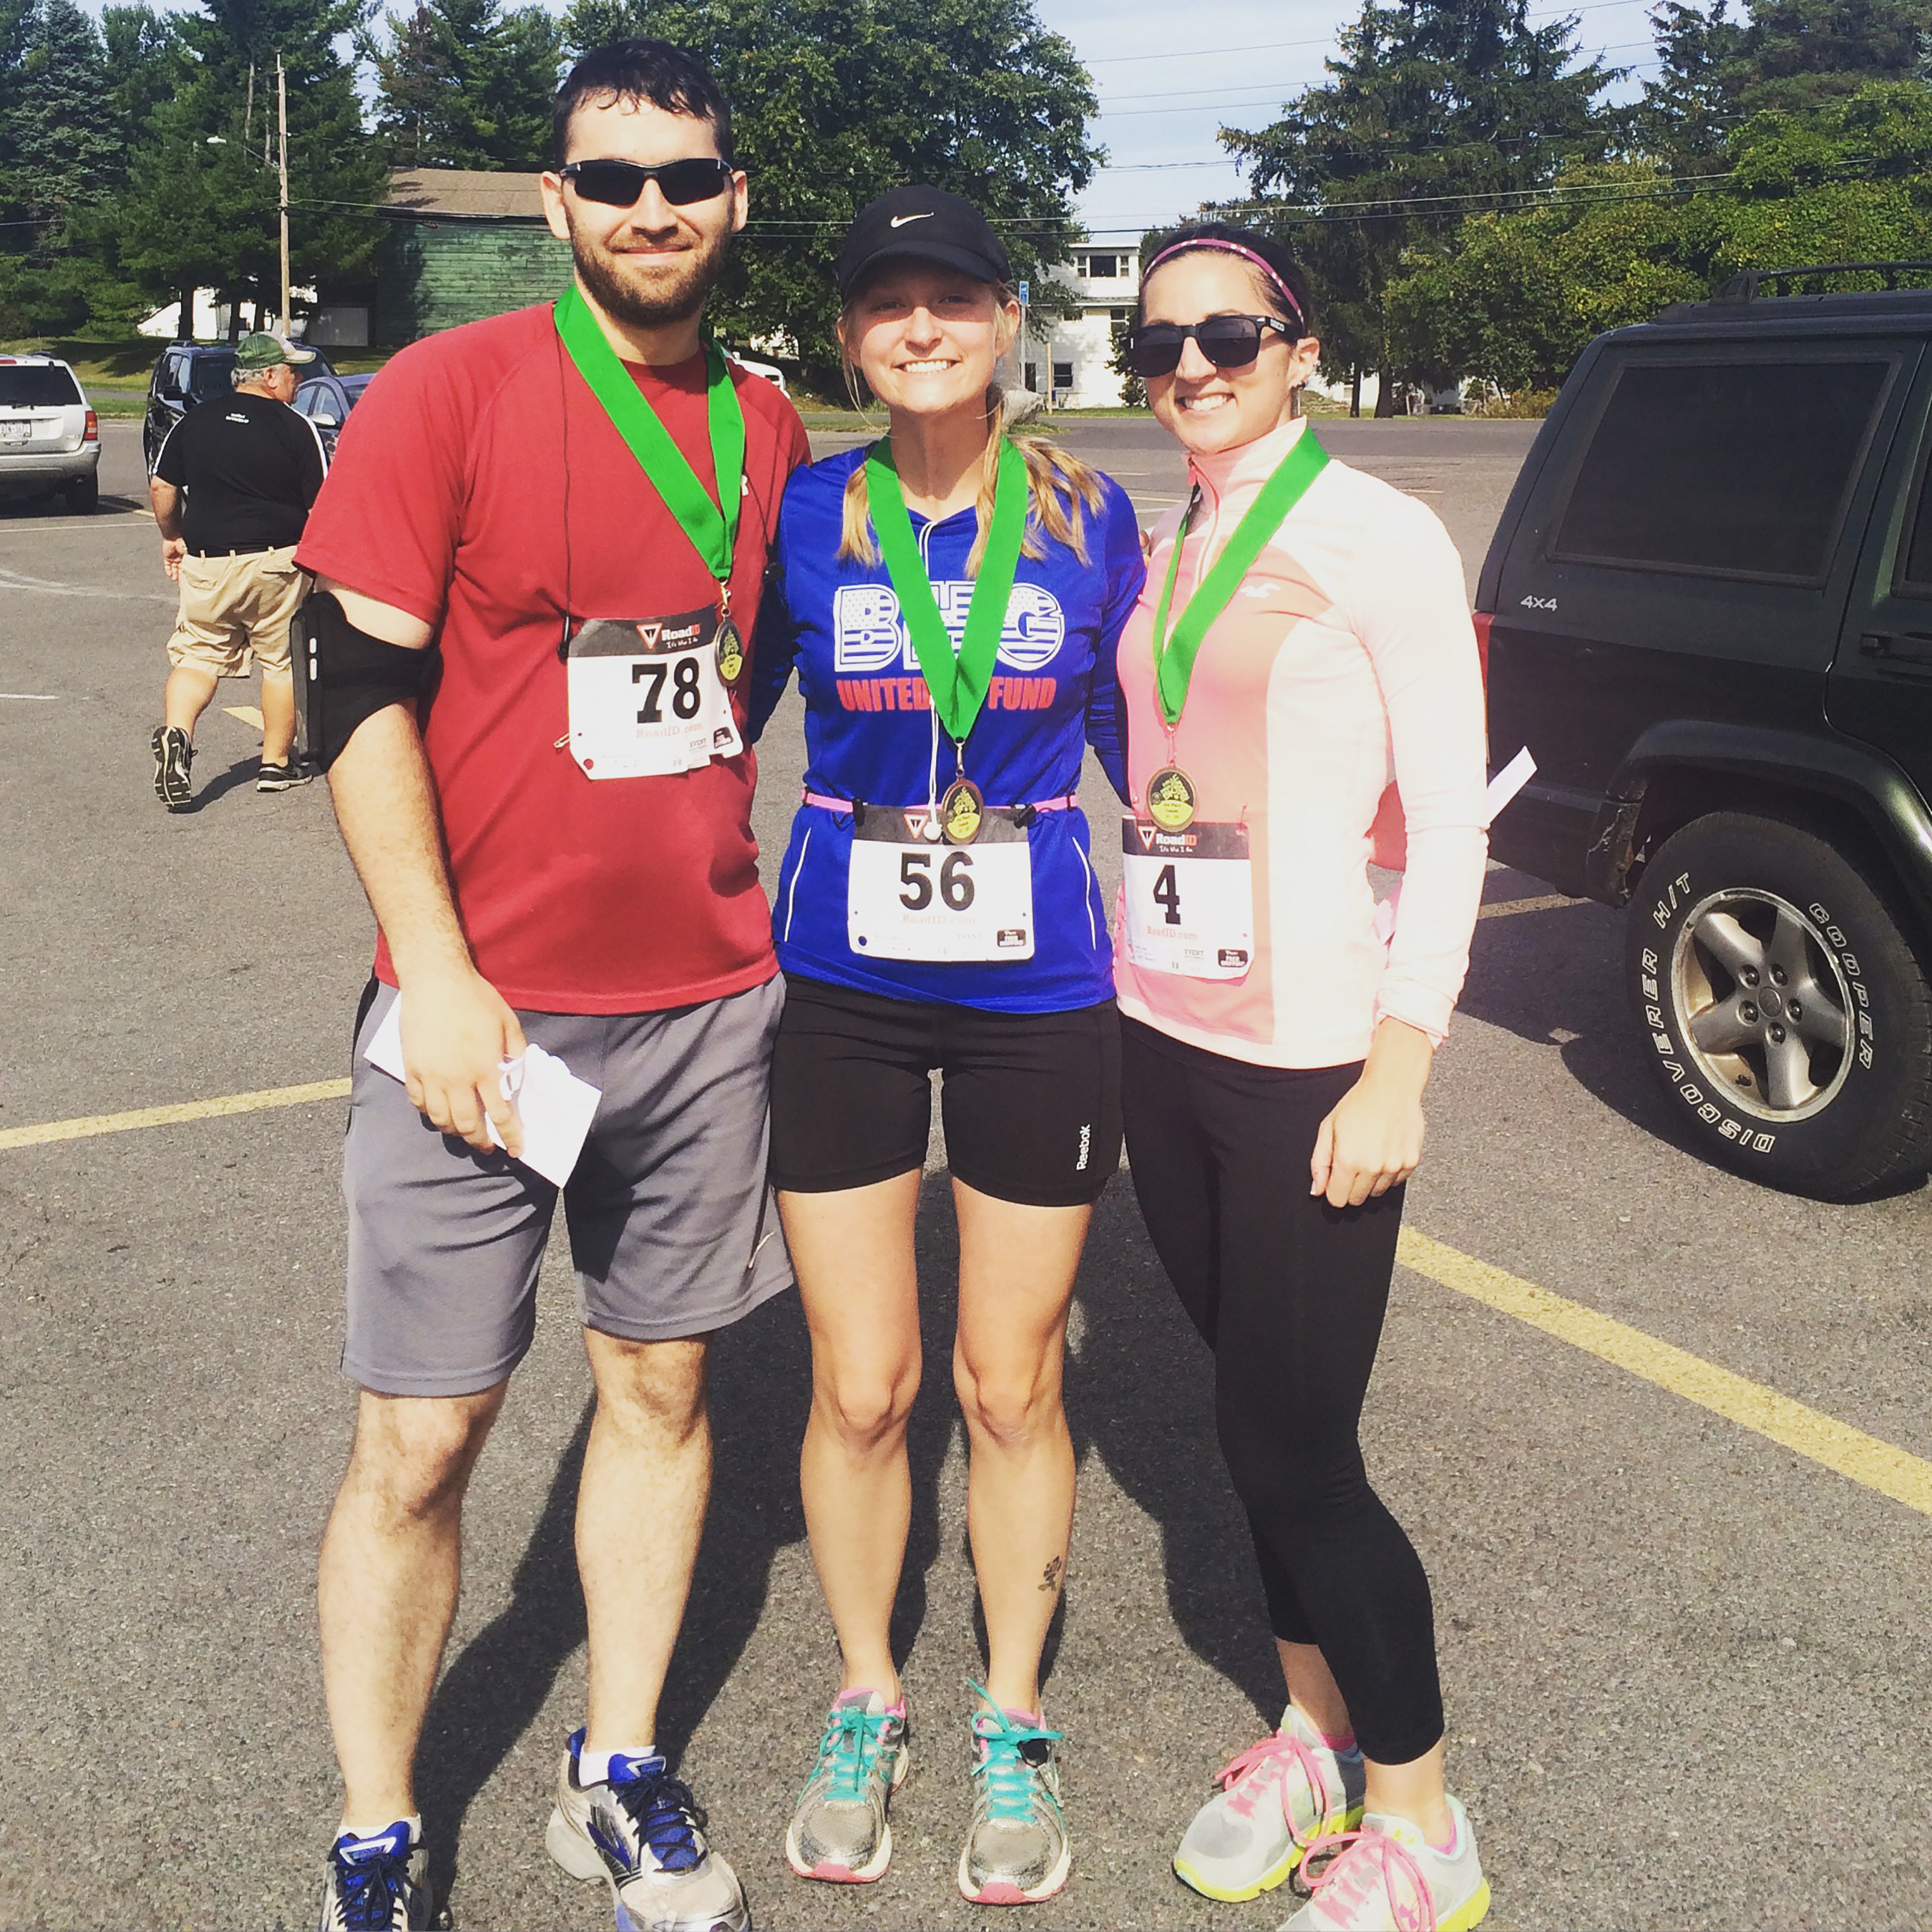 Bankers Healthcare Group would like to congratulate employees Kent Walker (left), Maria Milanesi (center) and Lisa Austin (right) on their outstanding performance in the sixth annual Ludden Fall Frolic 5K.